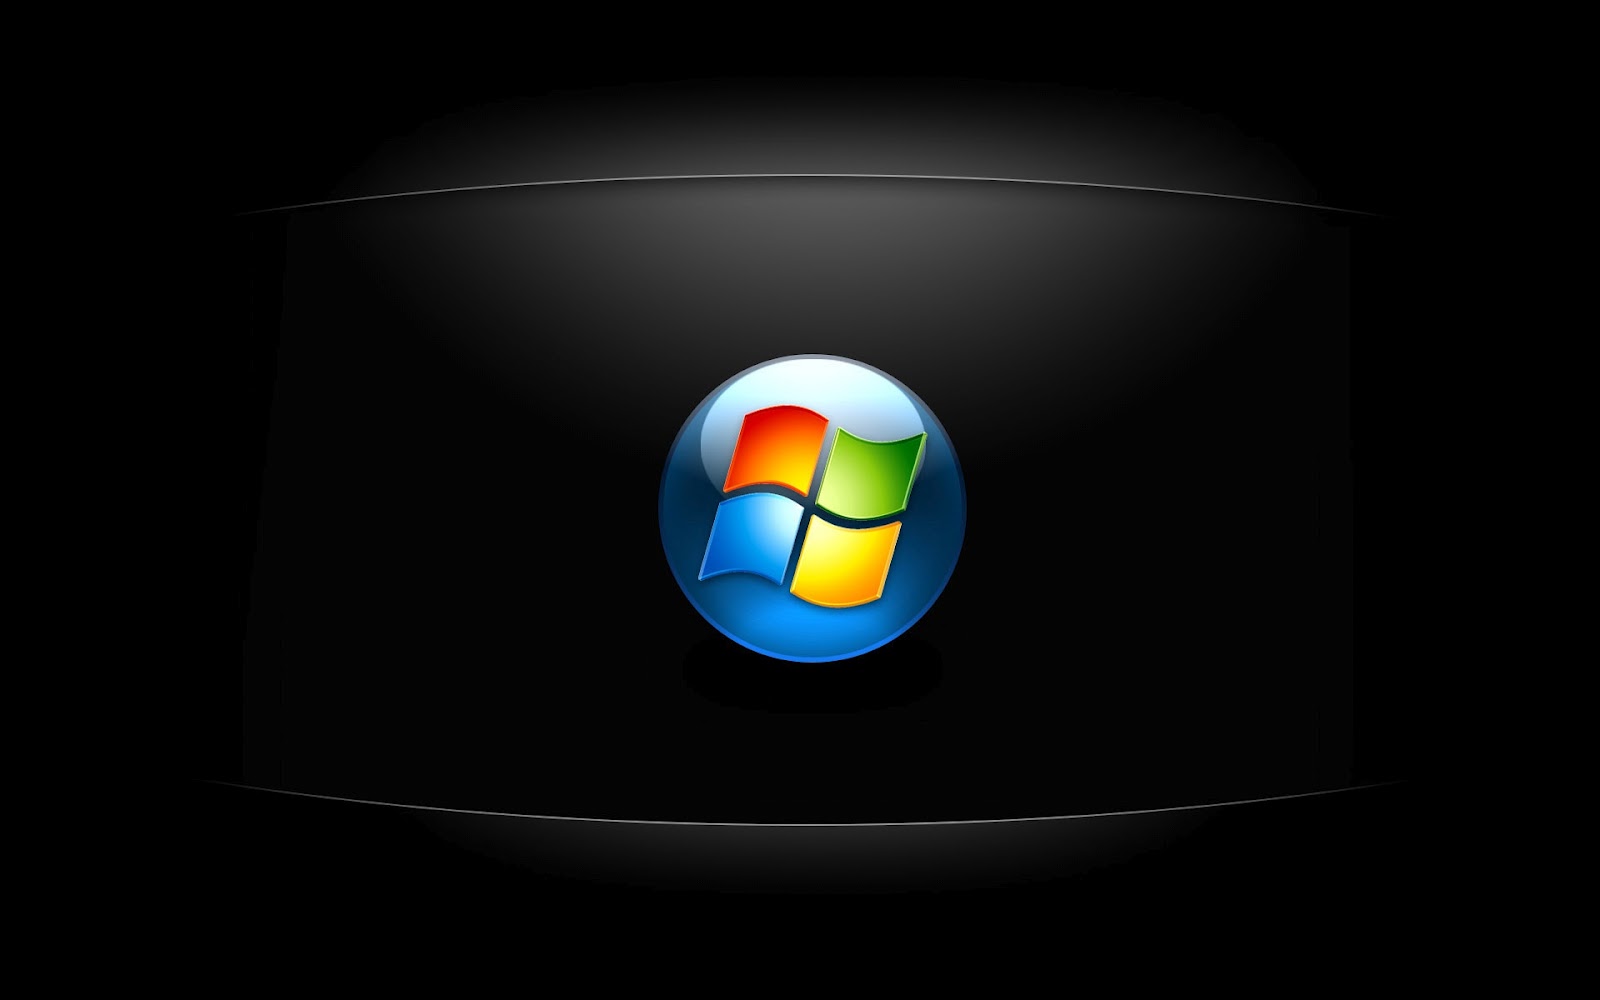 Windows 7 HD Wallpapers   a HD Wallpapers